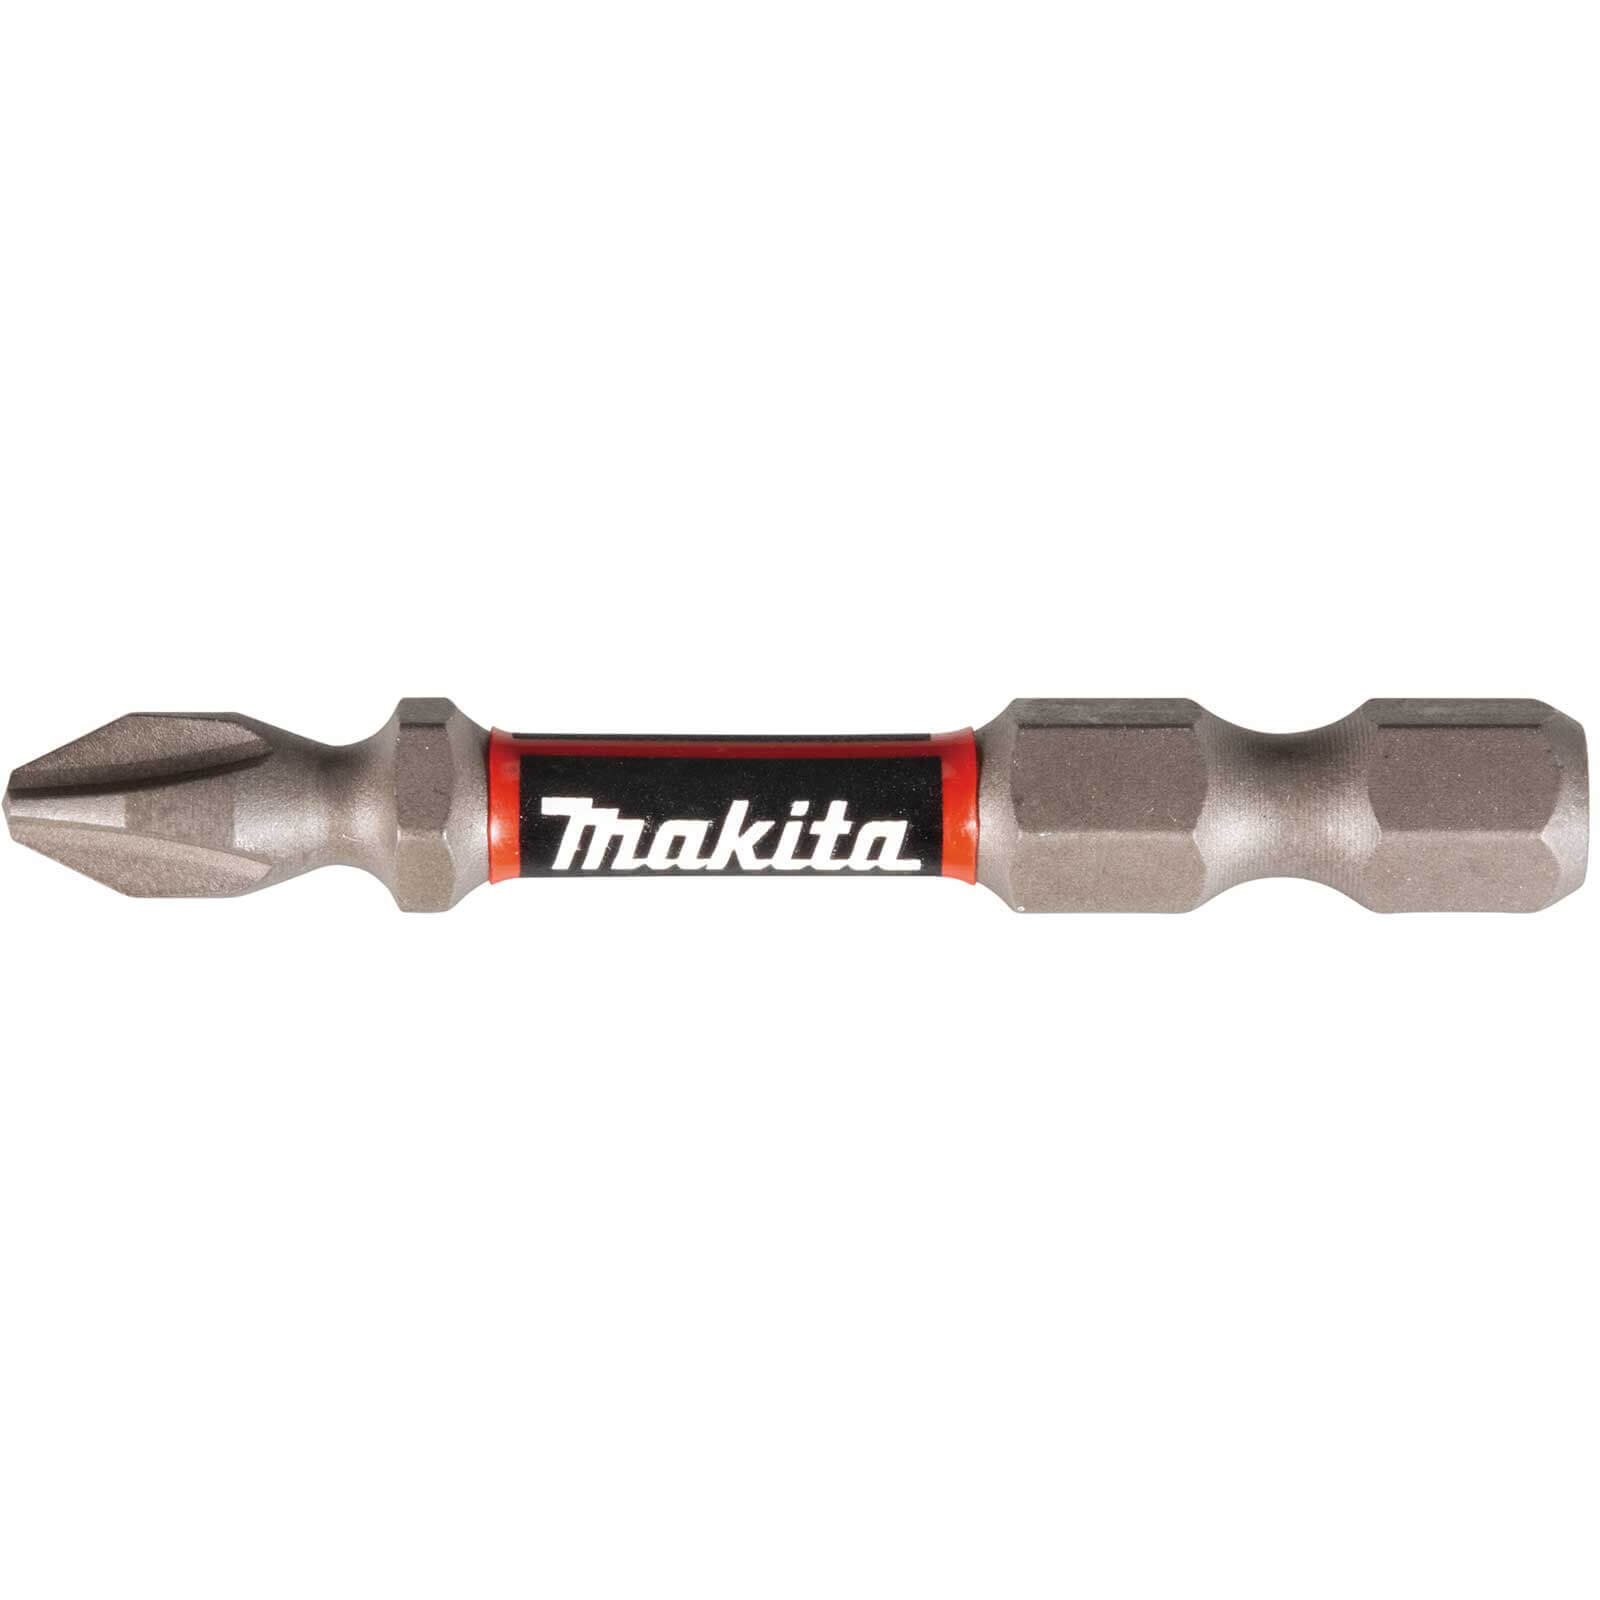 Photo of Makita Impact Premier Double Torsion Philips Screwdriver Bits Ph2 50mm Pack Of 10